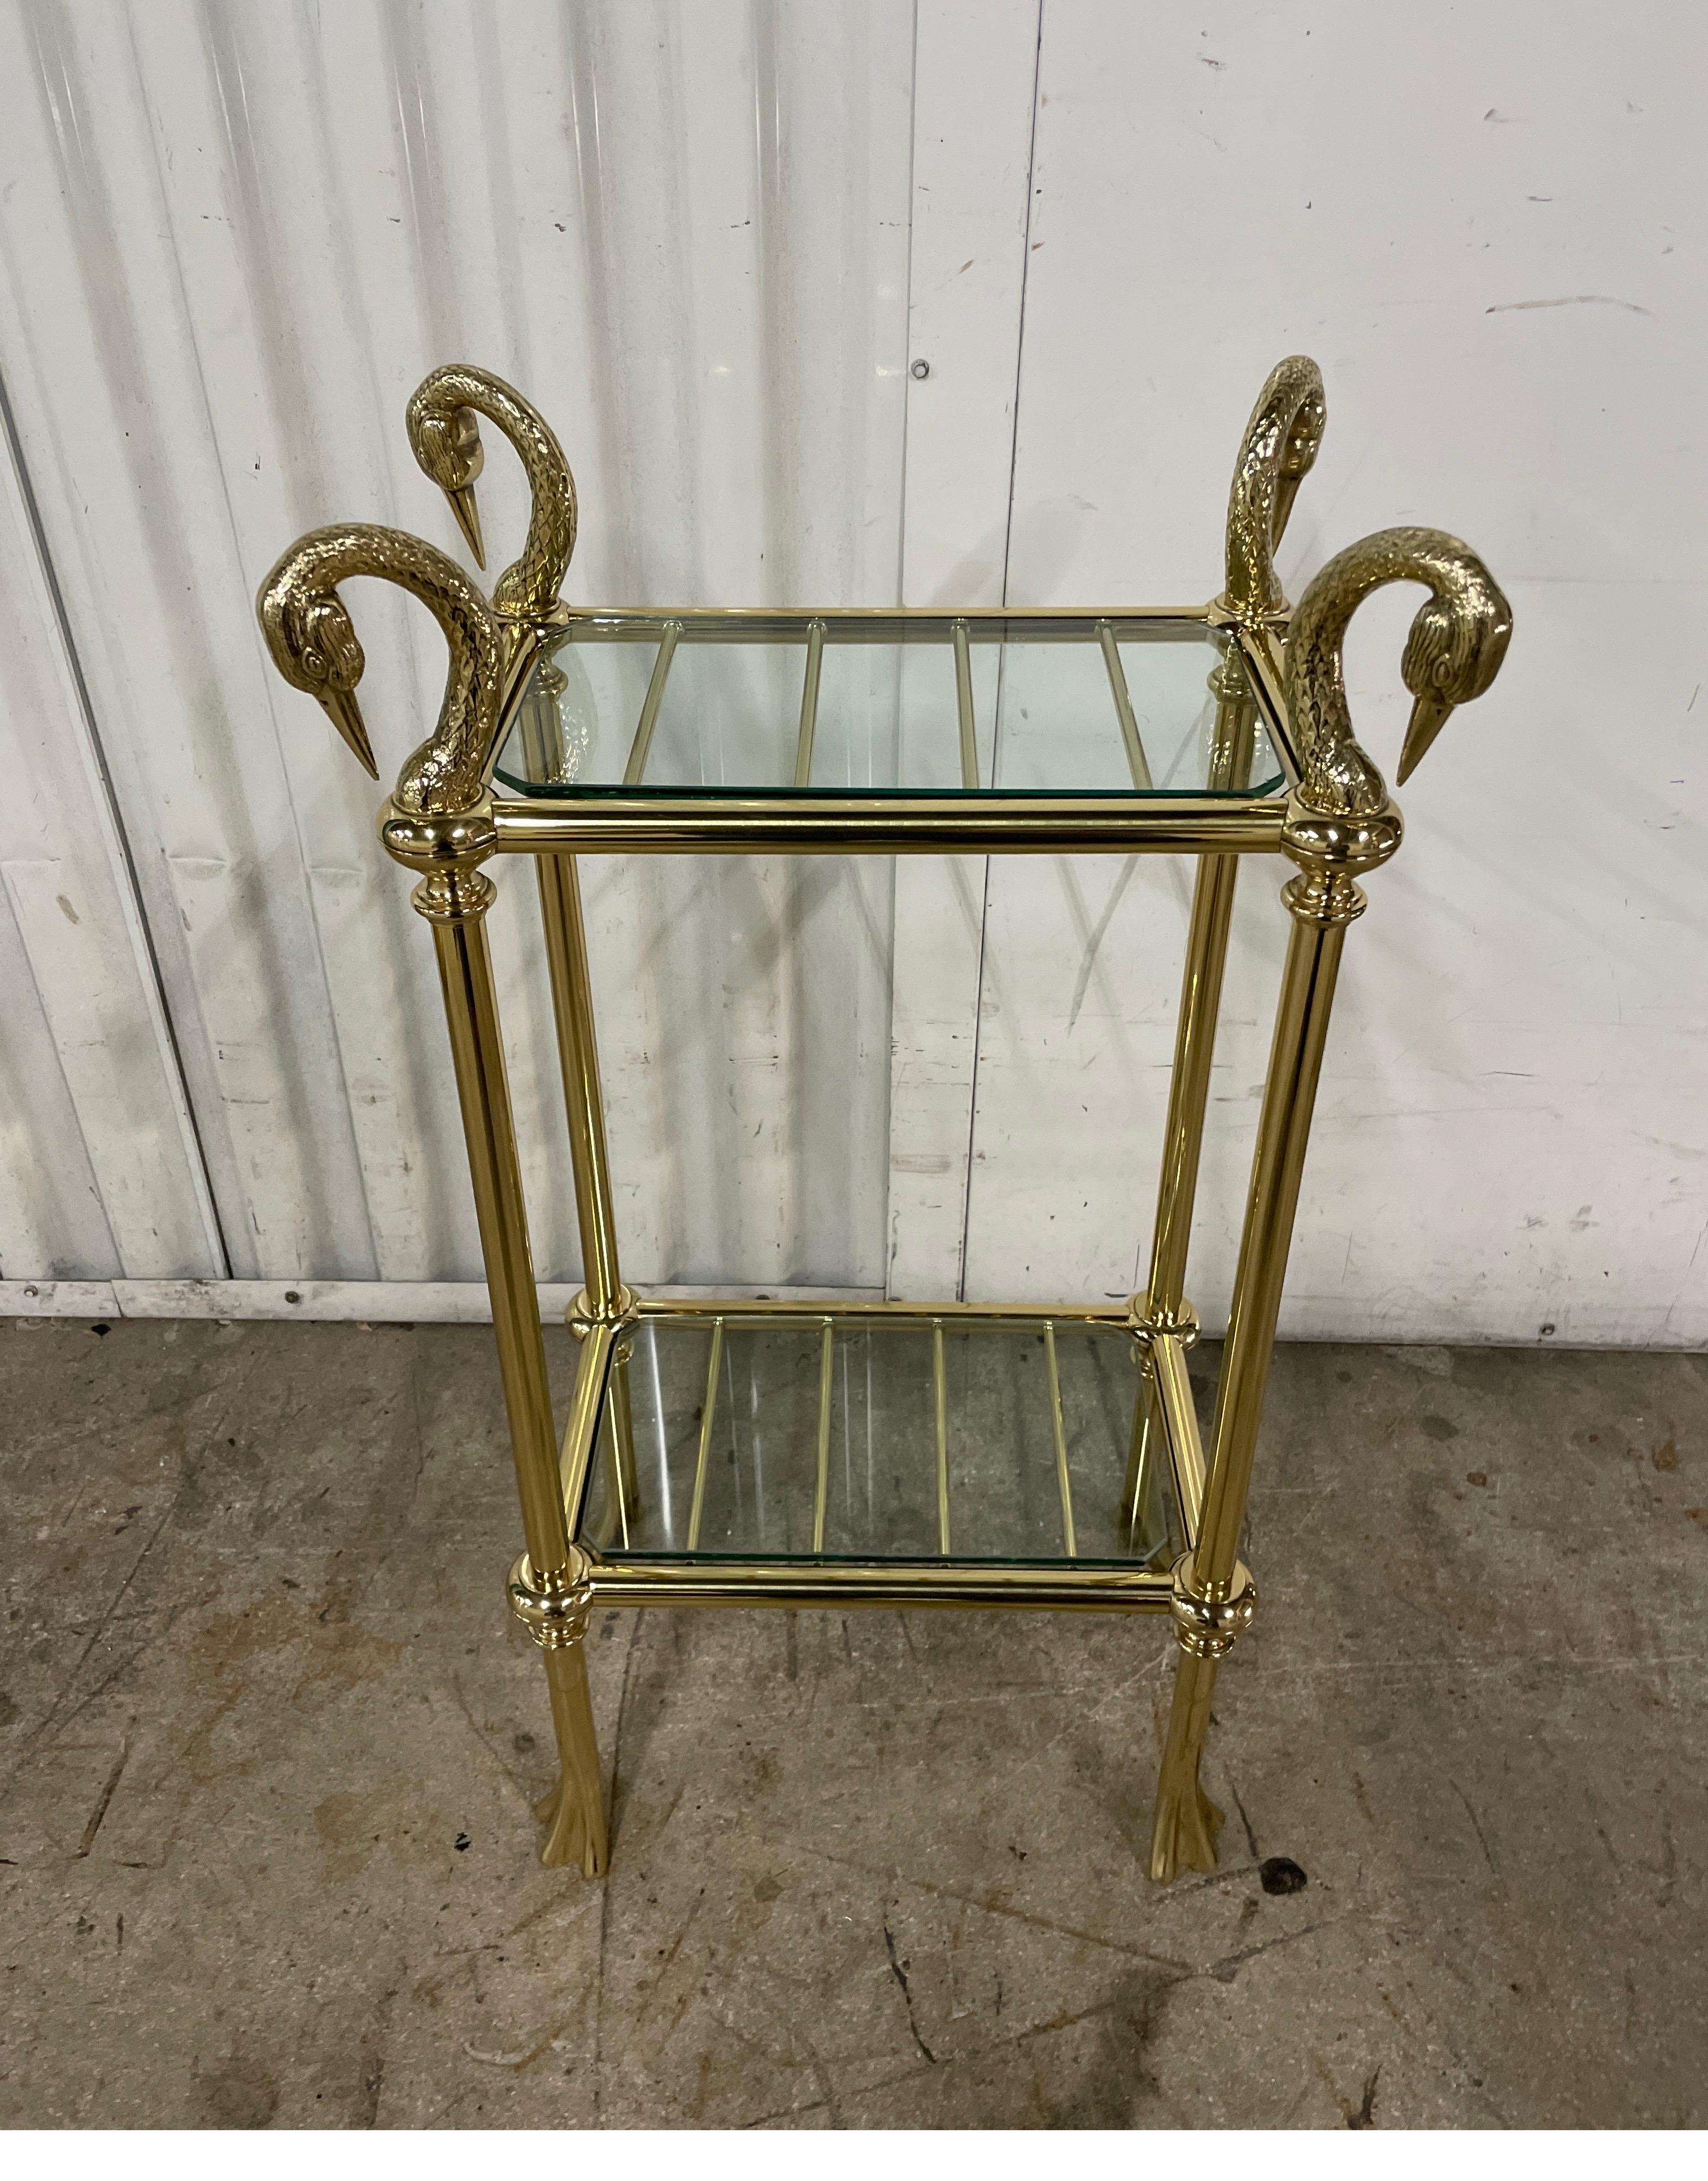 Exquisite brass two tiered stand with four Swan heads at top and Webb feet at bottom. Two glass shelves are held in place by brass rods. Wonderful chased details to swan heads.